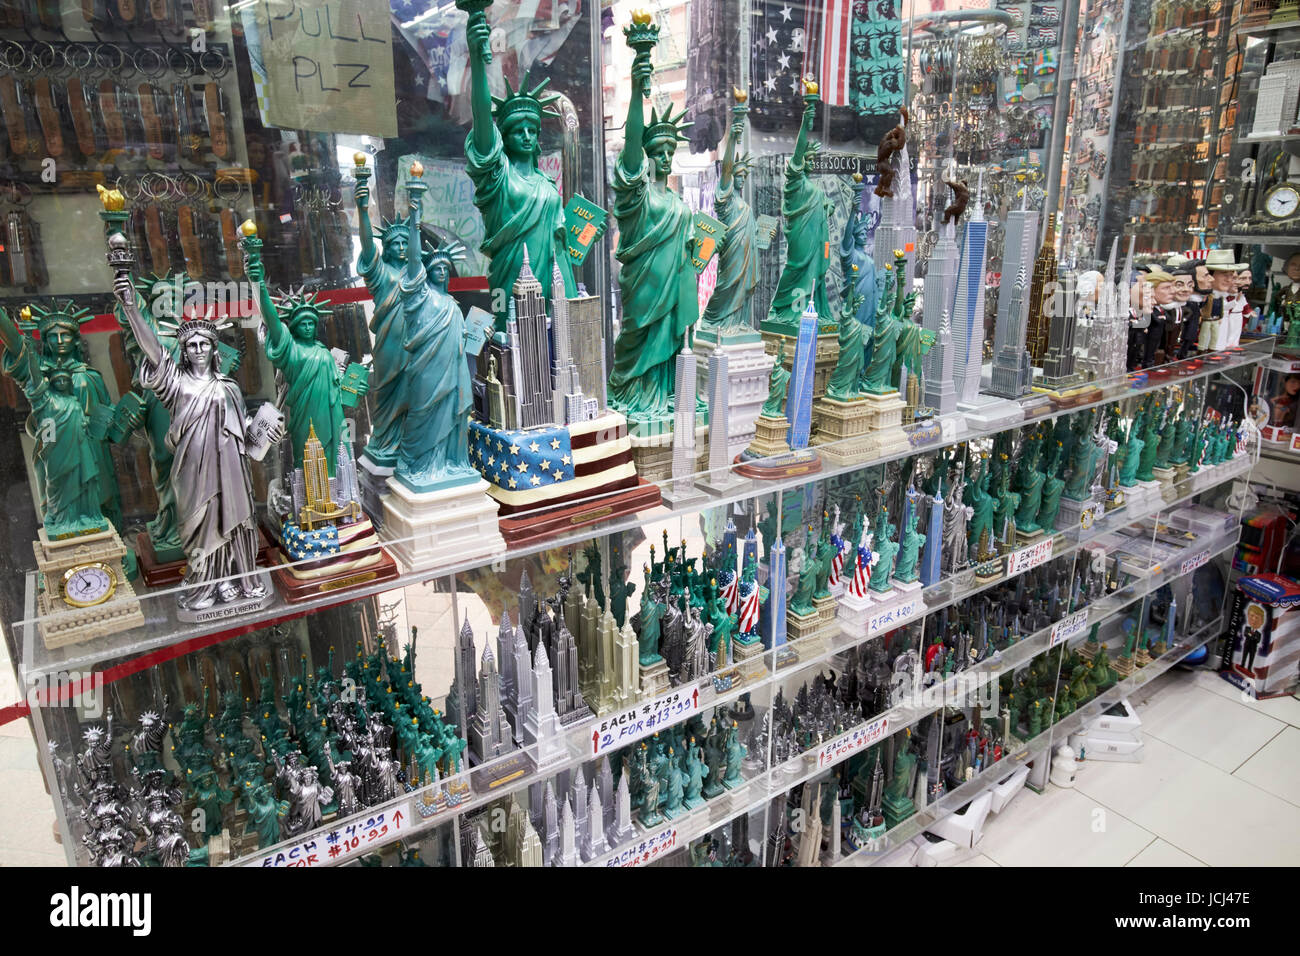 statue of liberty empire state and other souvenirs New York City souvenir gift shop USA Stock Photo